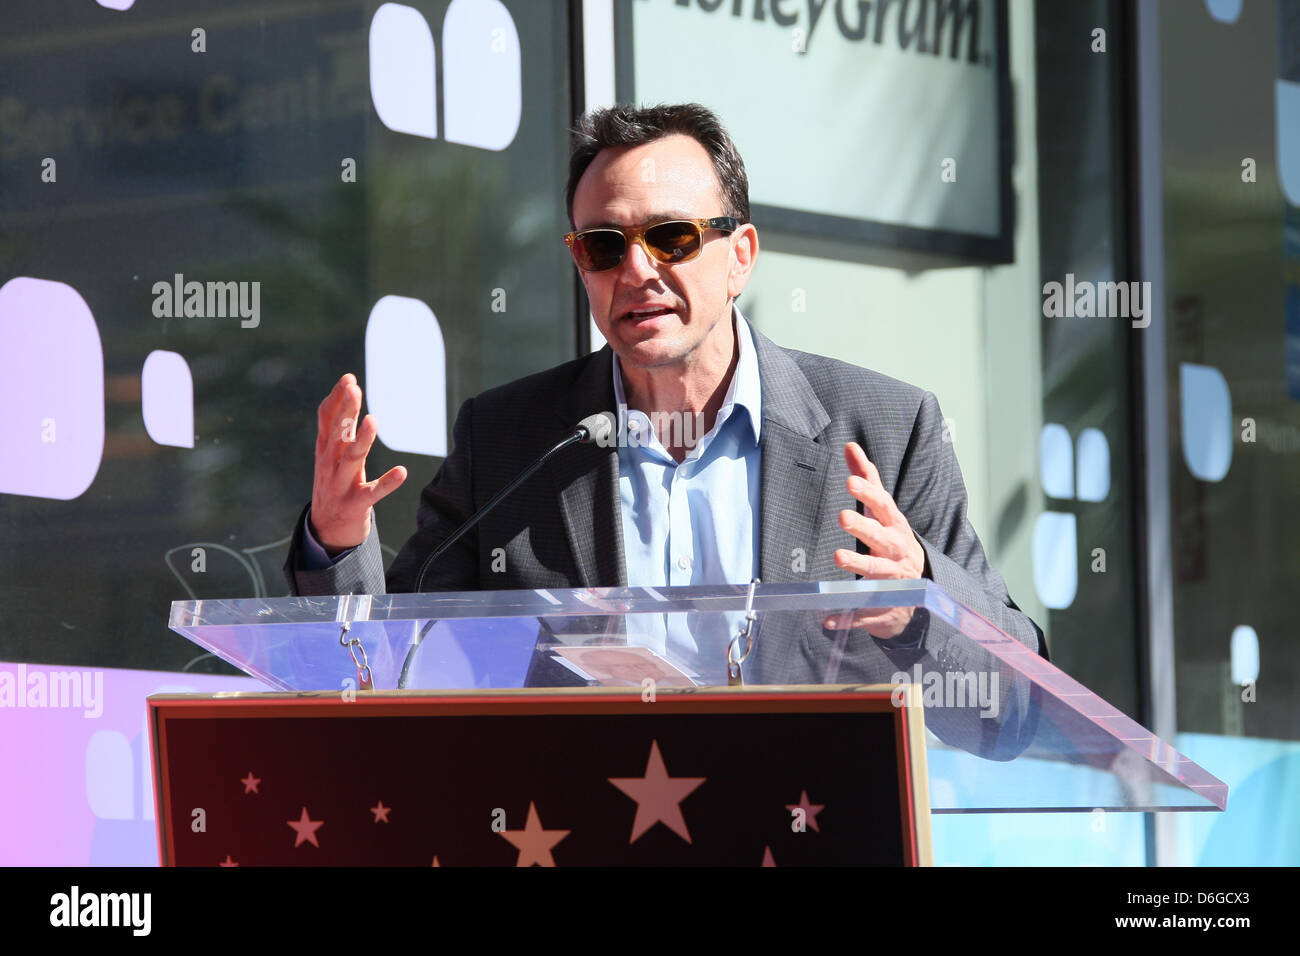 Actor Hank Azaria attends the ceremony honorong the creator of tv show The Simpsons, Matt Groening, with a new star on the Hollywood Walk Of Fame on Hollywood Boulevard in Los Angeles, USA, on 14 February 2012. Photo: Hubert Boesl Stock Photo